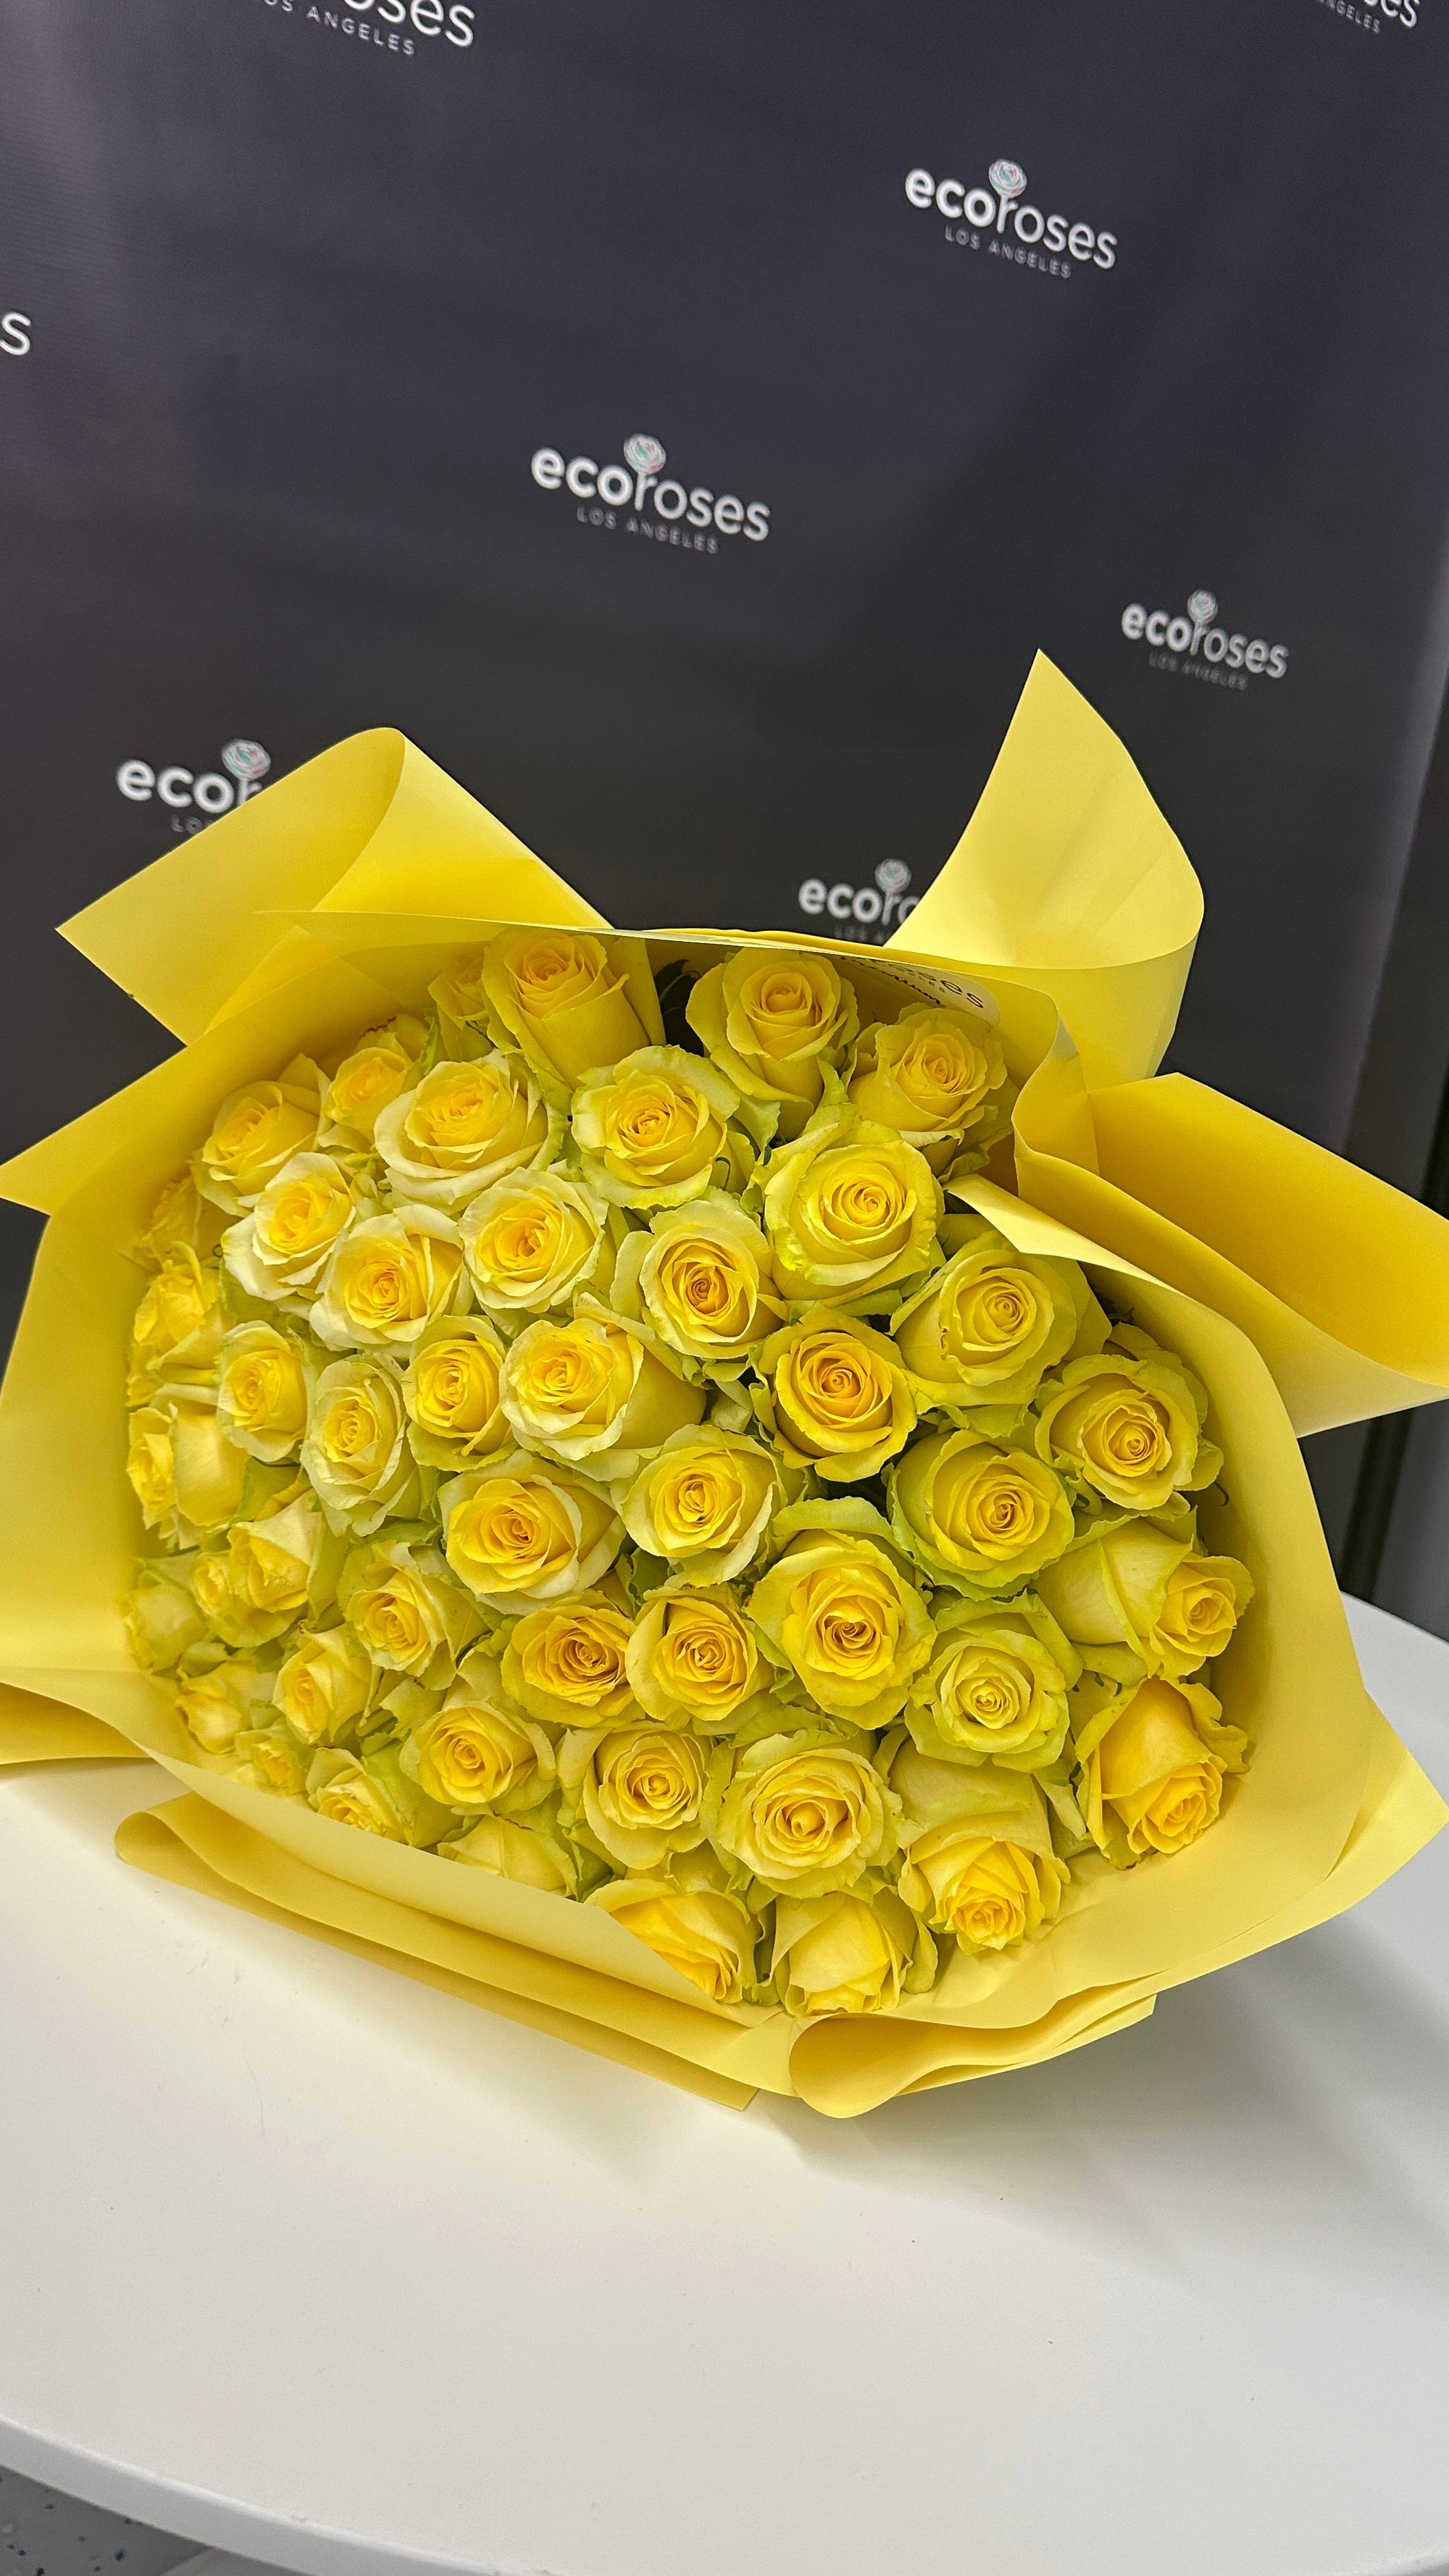 Glendale Flowers Citrus Bliss sunny yellow roses will brighten up your day and bring a smile to your face. Perfect for gifting to a loved one or treating yourself to some cheerful decor.